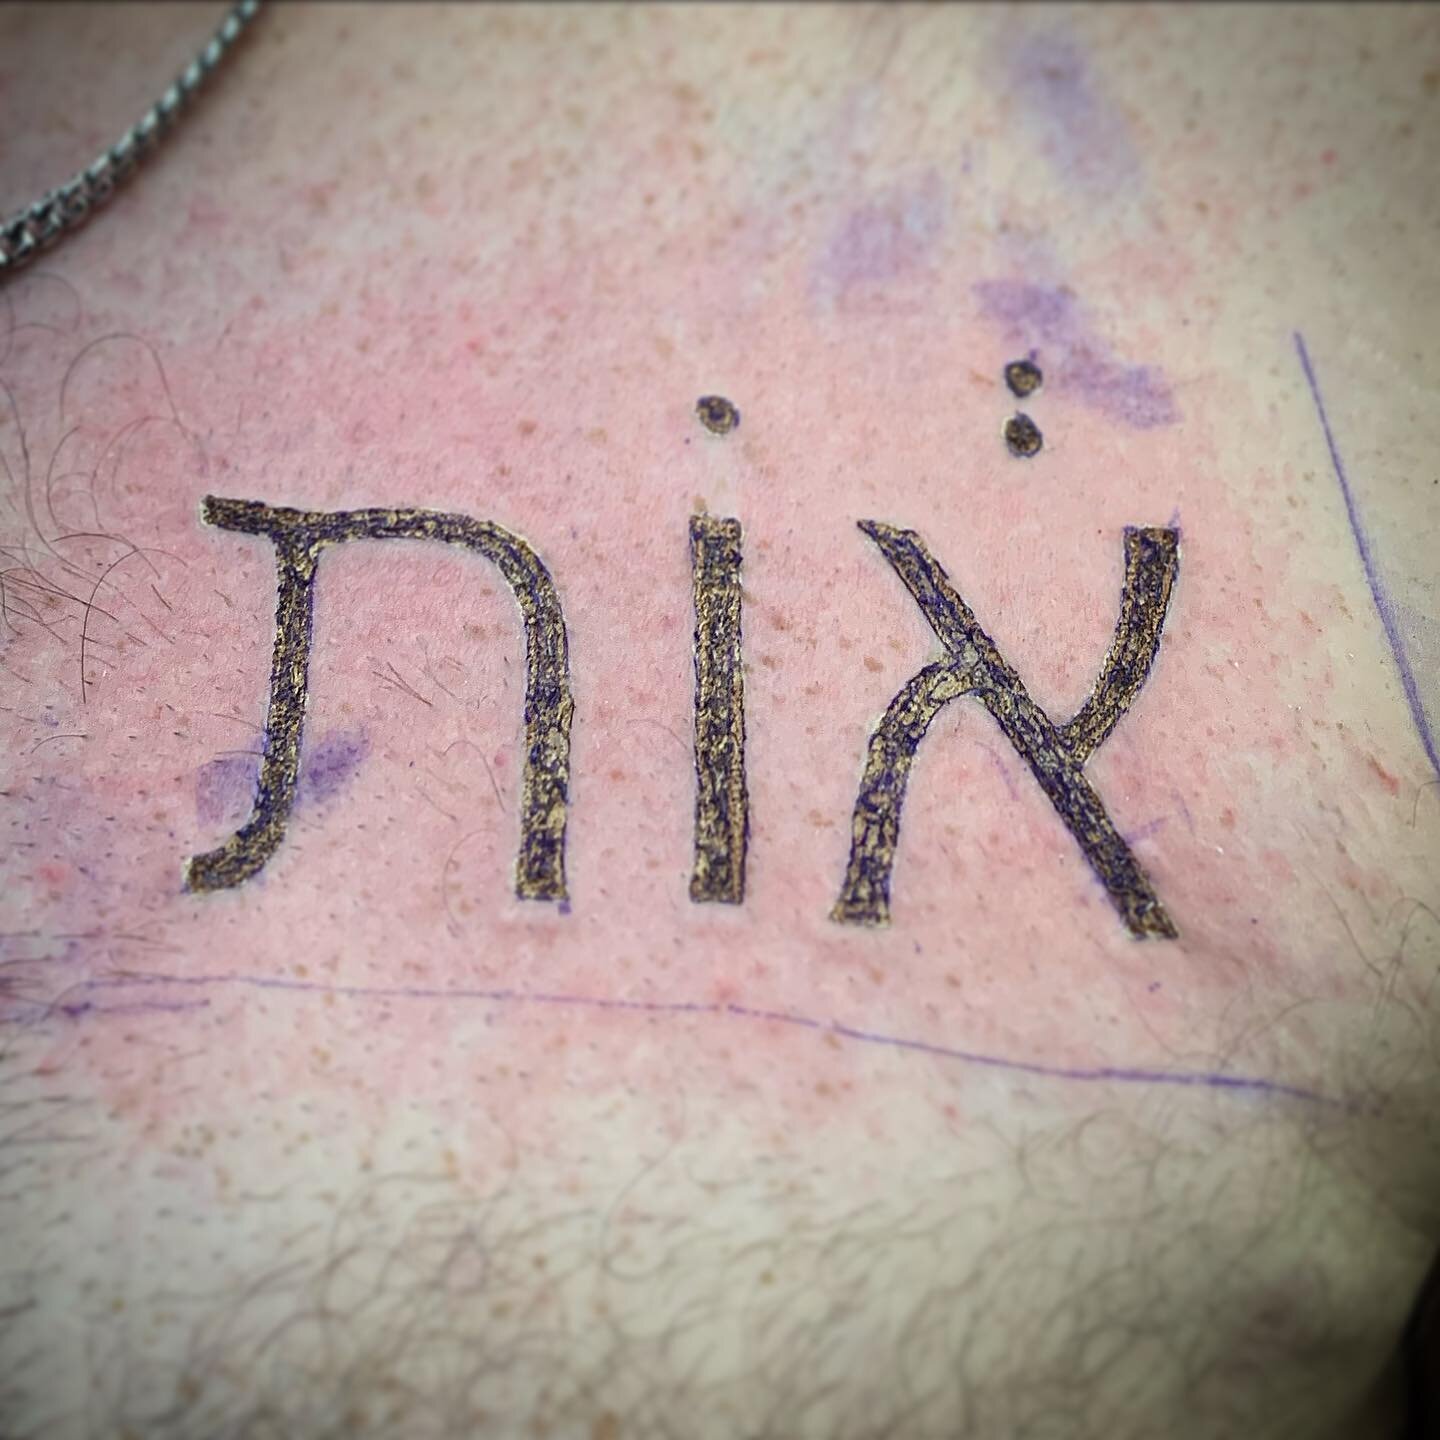 Dylan came to see me from Fort Dodge for this Hebrew scarification. I love branding work and meeting new, great clients like him! Thanks Dylan! #mayamodification #scarification #branding #brandings #hebrewart